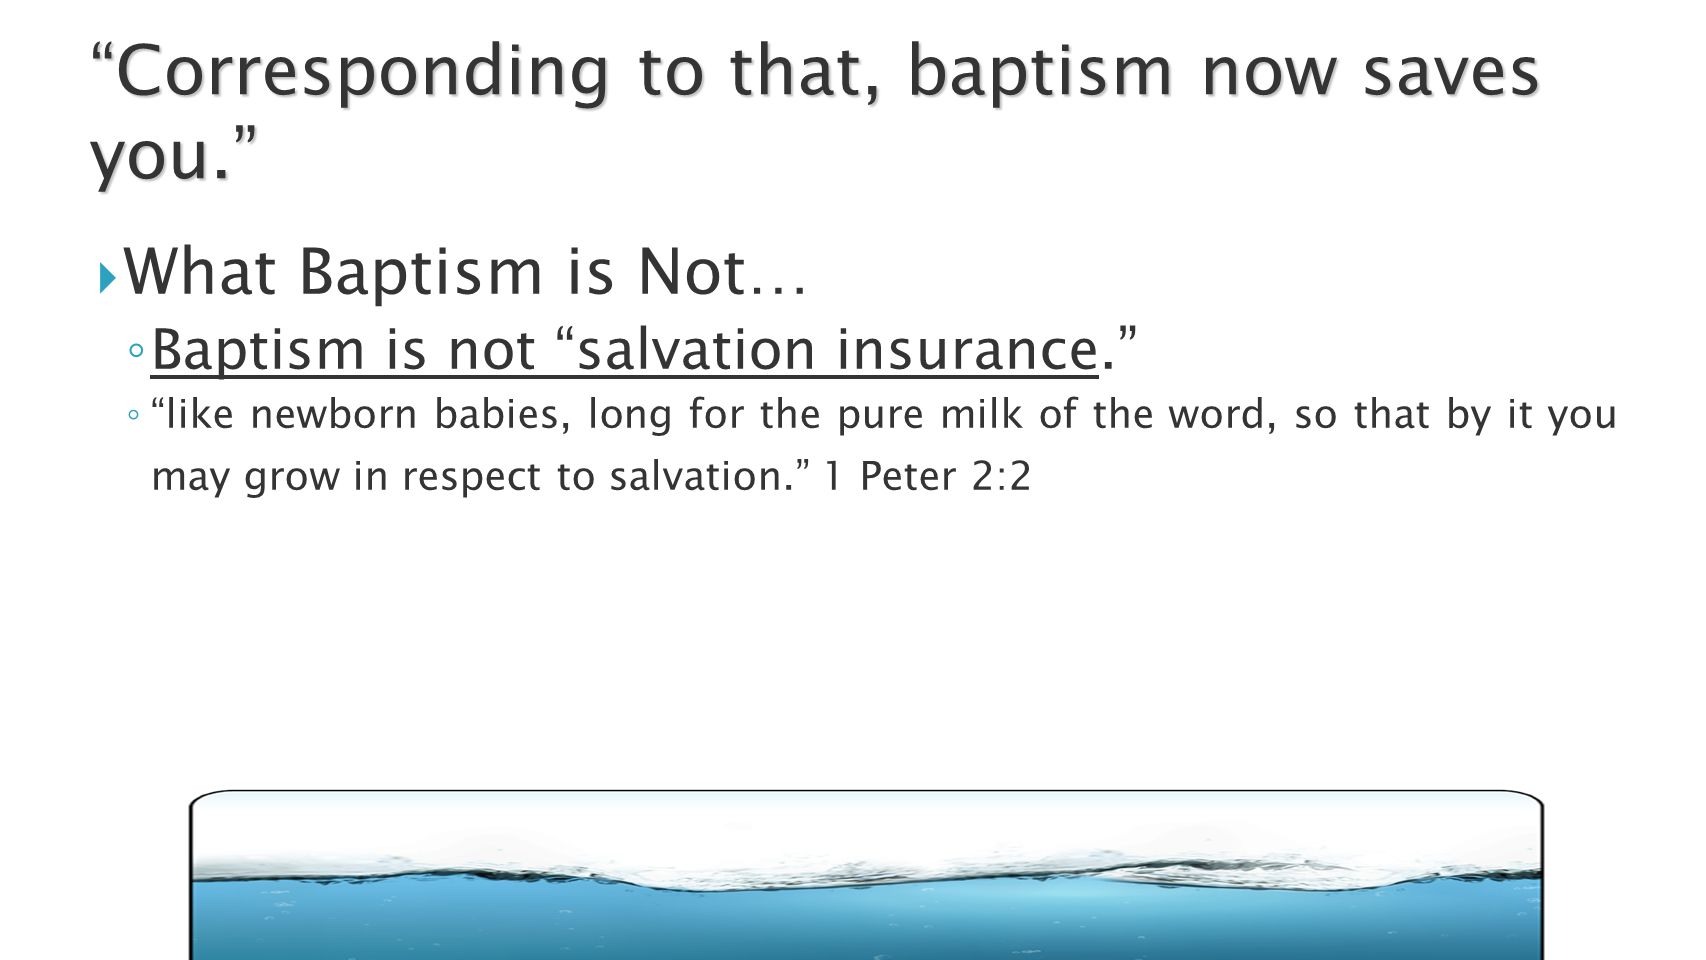  What Baptism is Not… ◦ Baptism is not salvation insurance. ◦ like newborn babies, long for the pure milk of the word, so that by it you may grow in respect to salvation. 1 Peter 2:2 Corresponding to that, baptism now saves you.